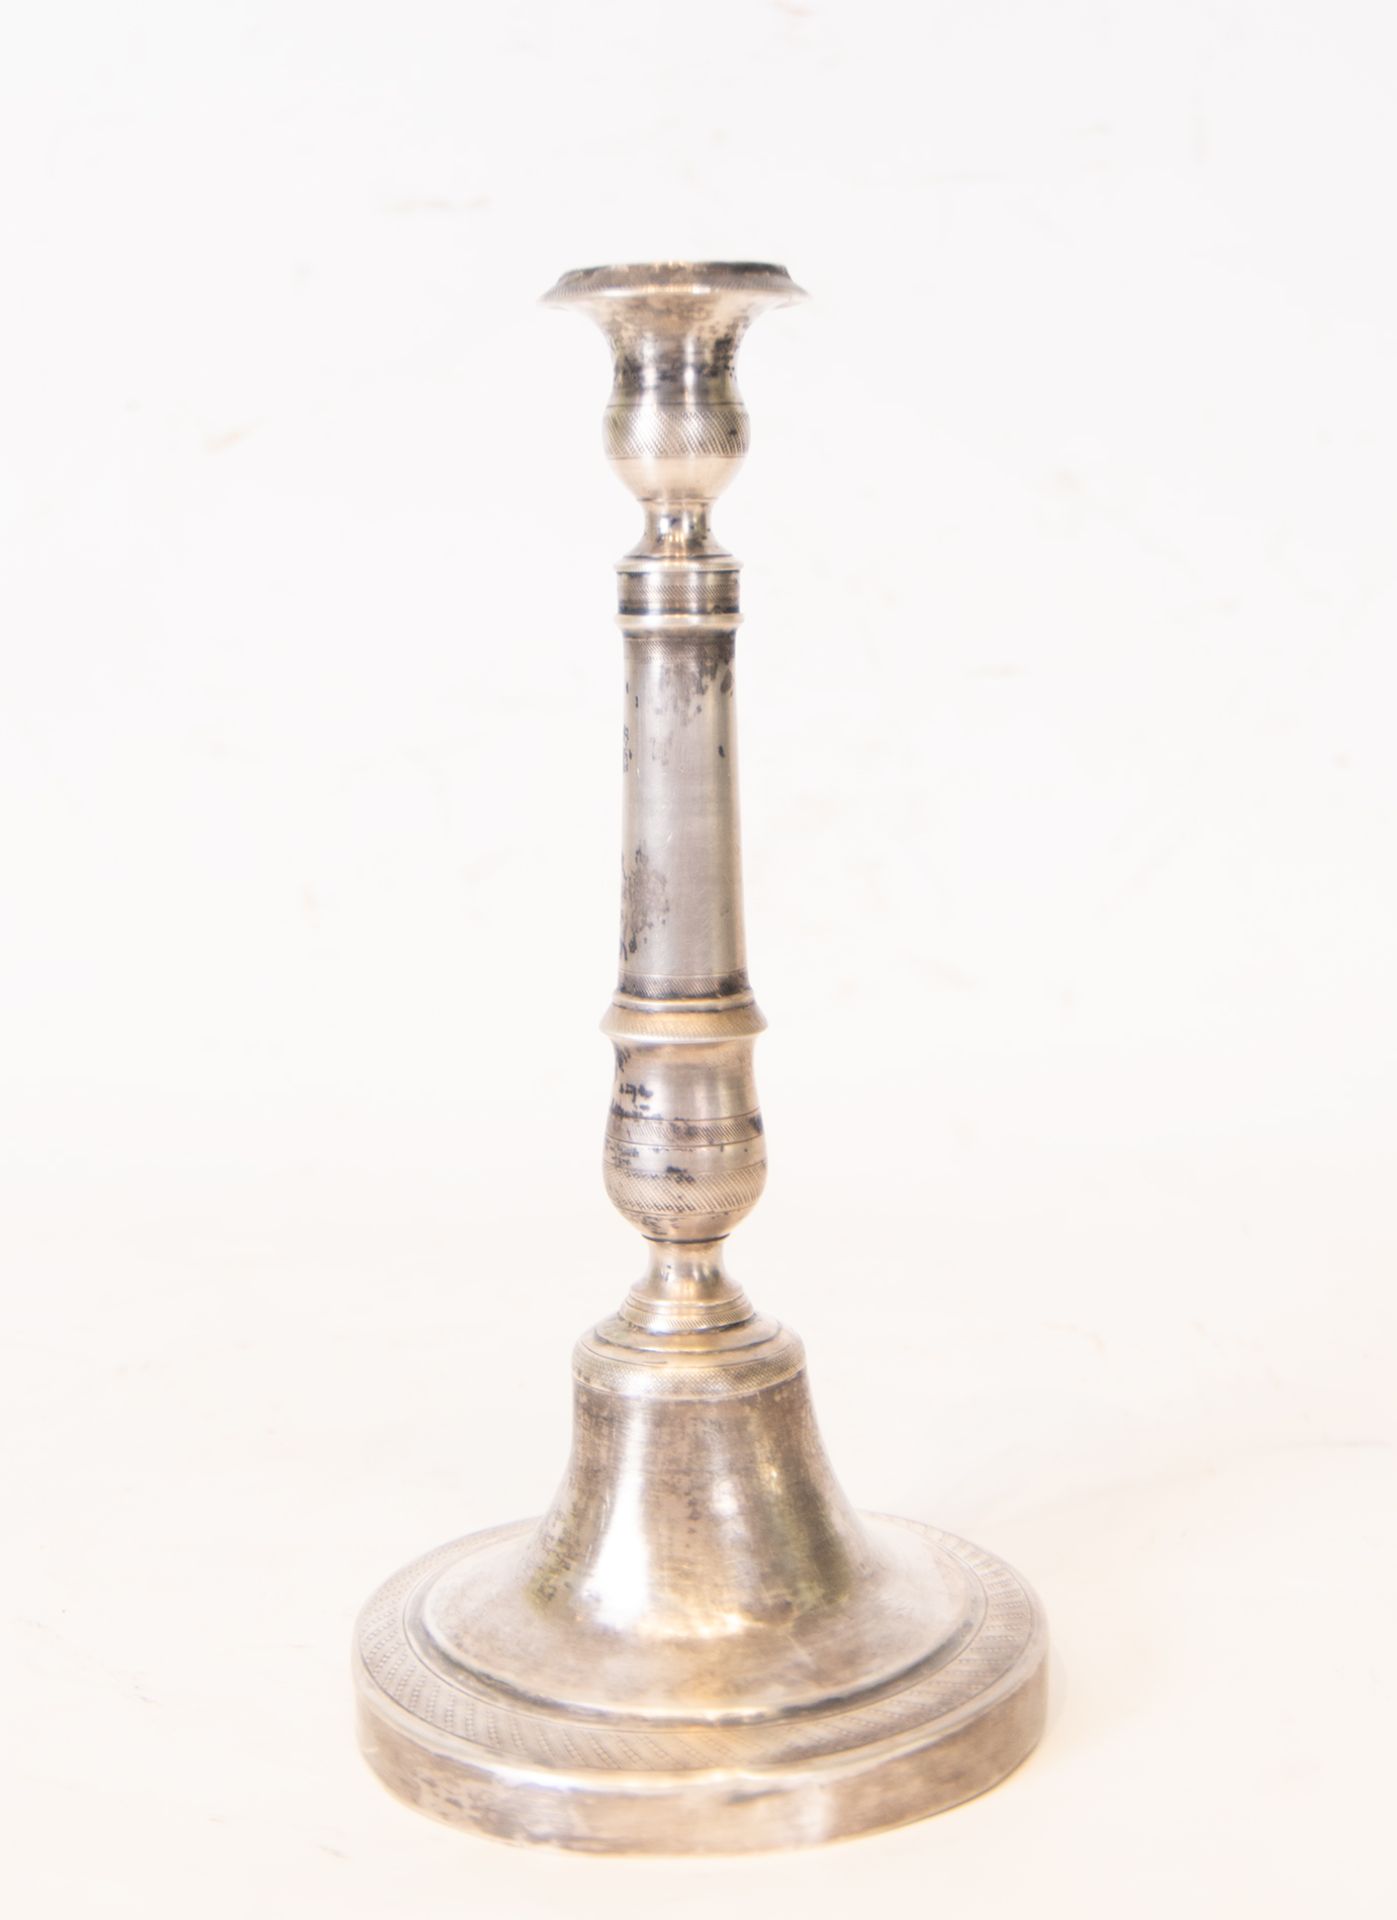 Pair of rare Fernandino candlesticks in solid silver, Spanish school of the 18th - 19th century - Image 7 of 8